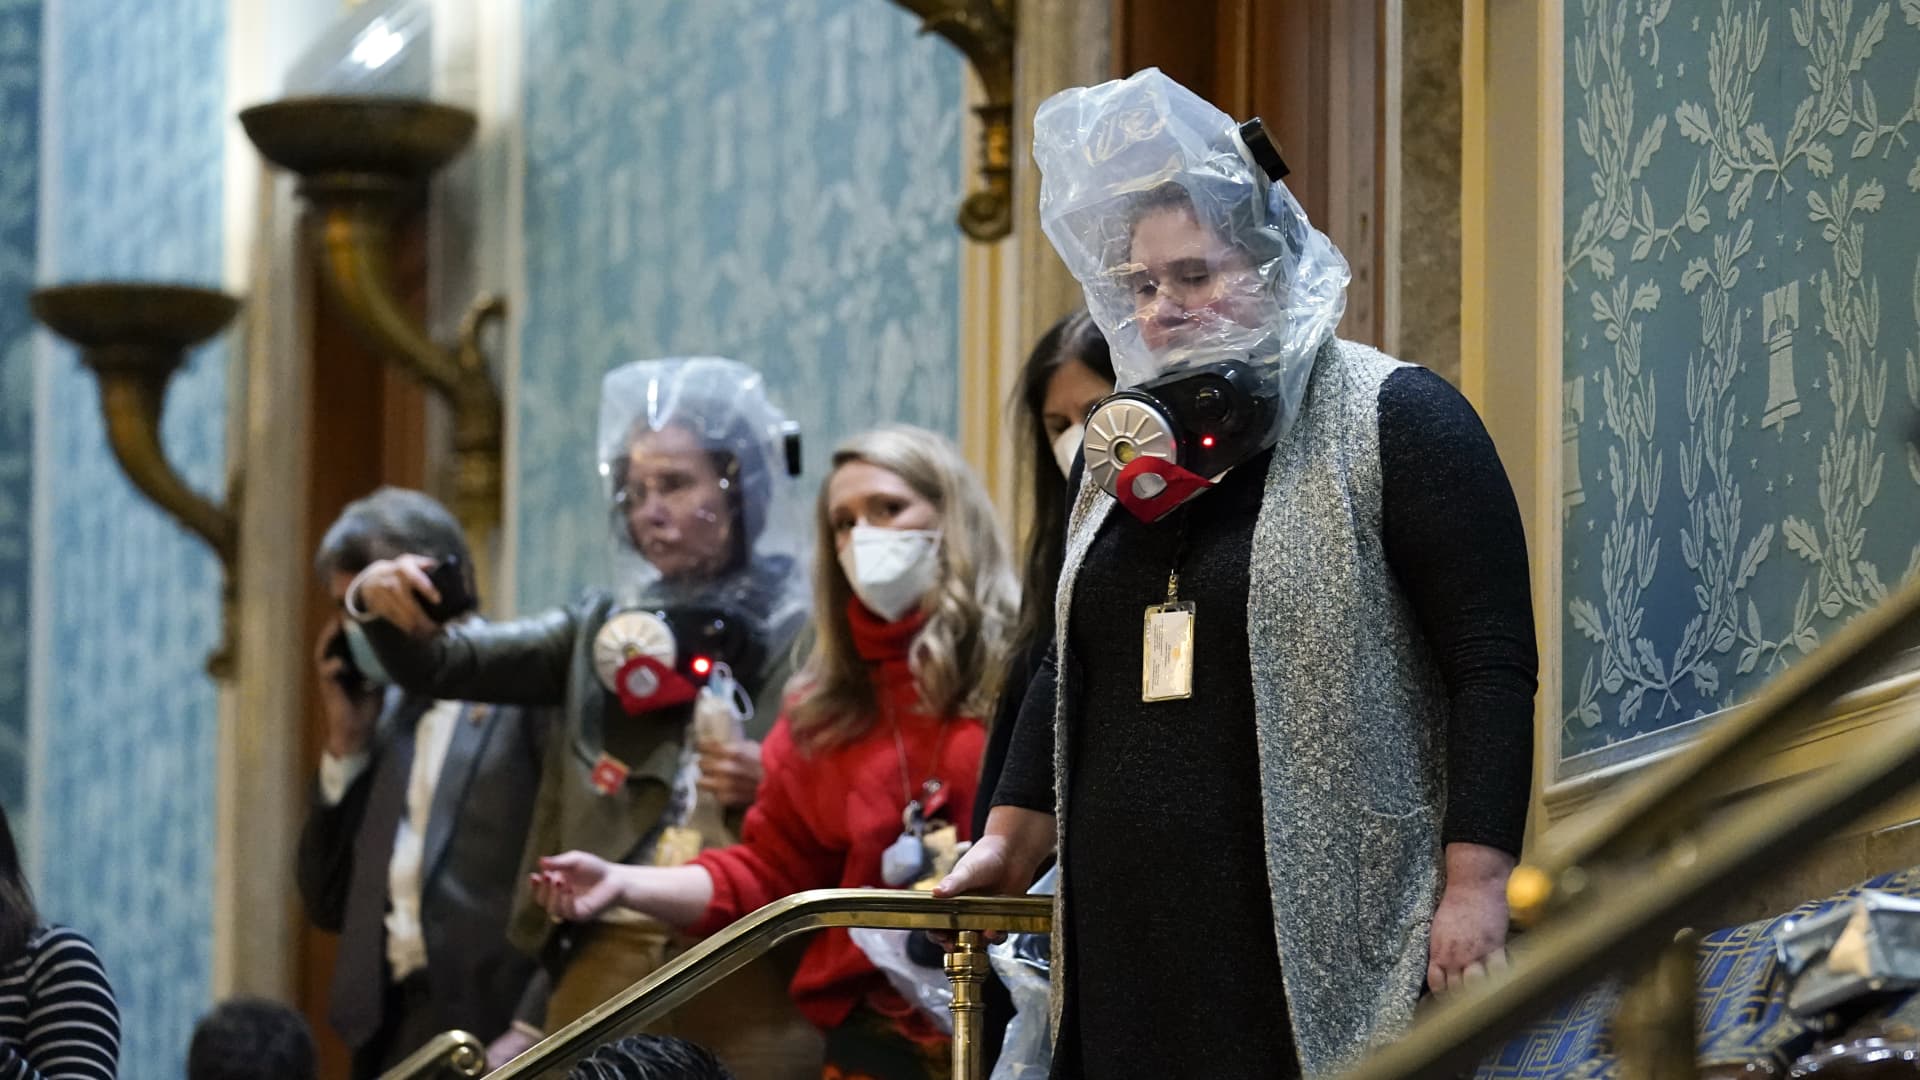 People are seen in the House gallery as protesters try to break into the House Chamber at the U.S. Capitol on Wednesday, Jan. 6, 2021, in Washington.